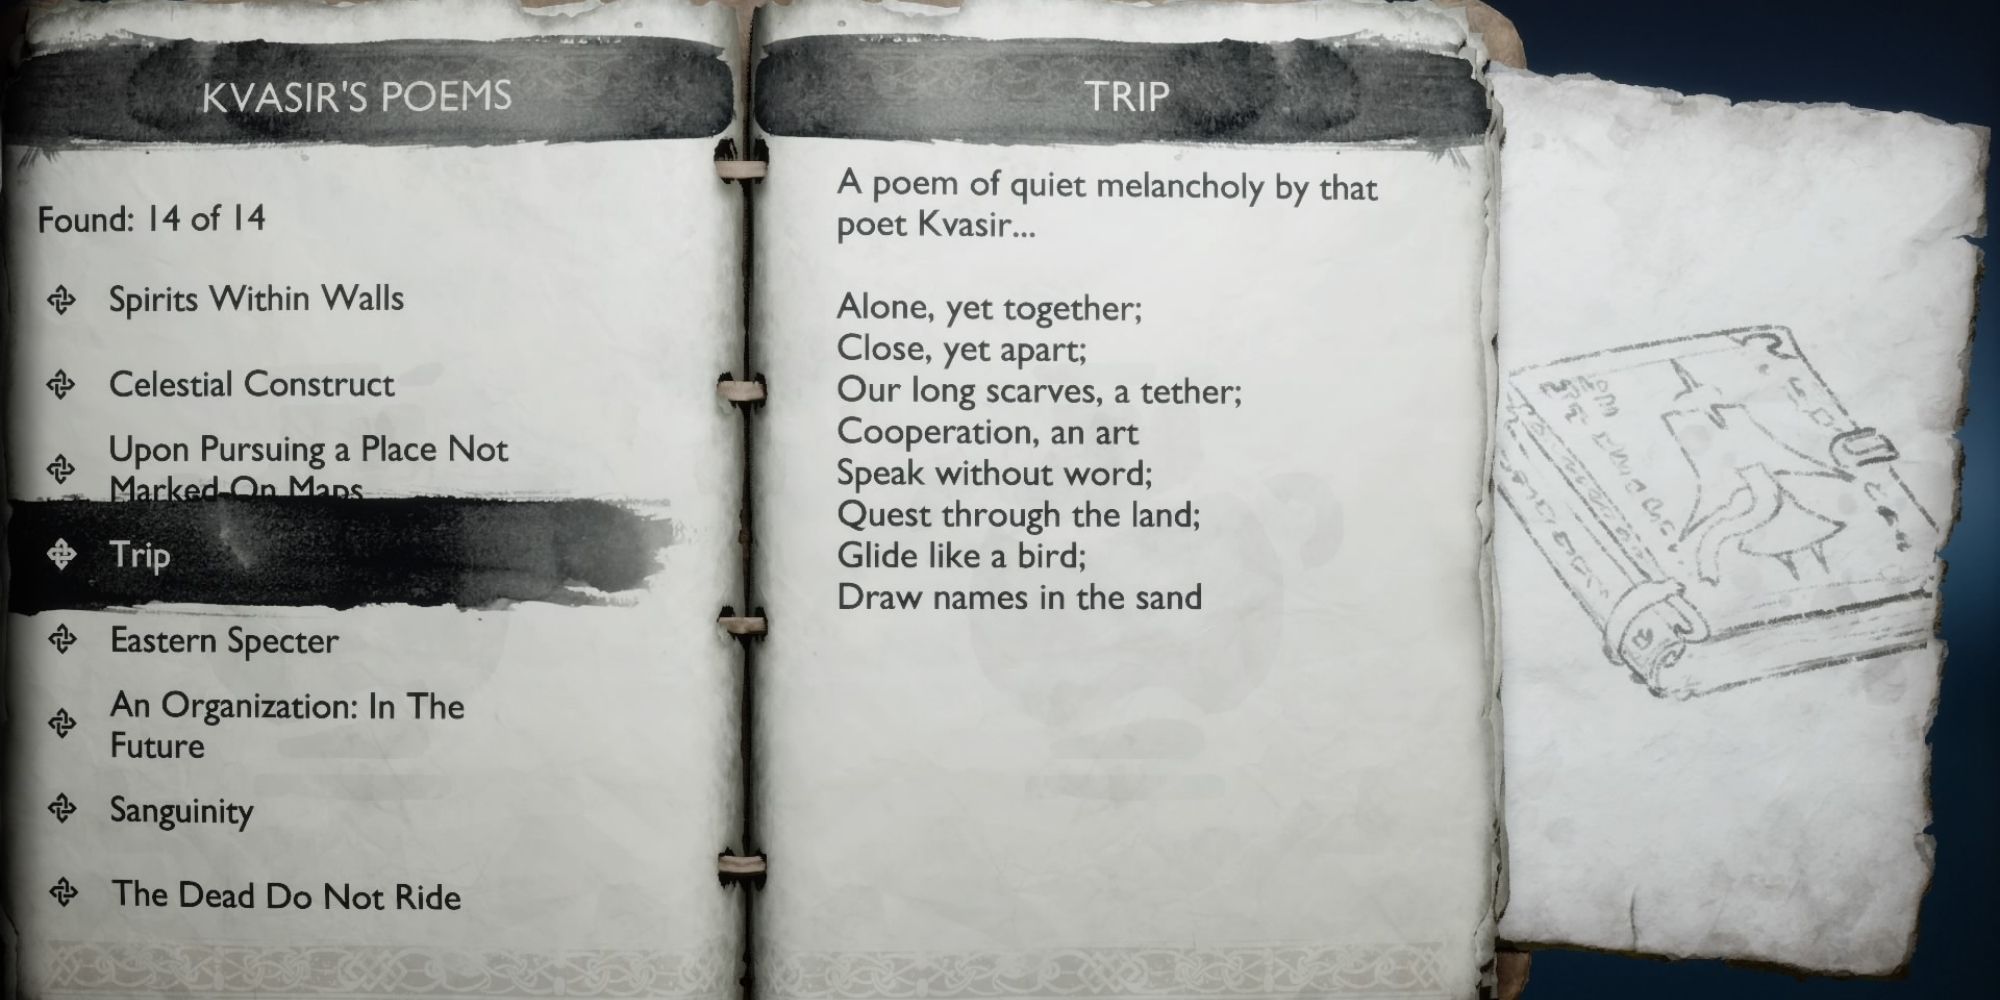 Krato's journal open to the page about Trip